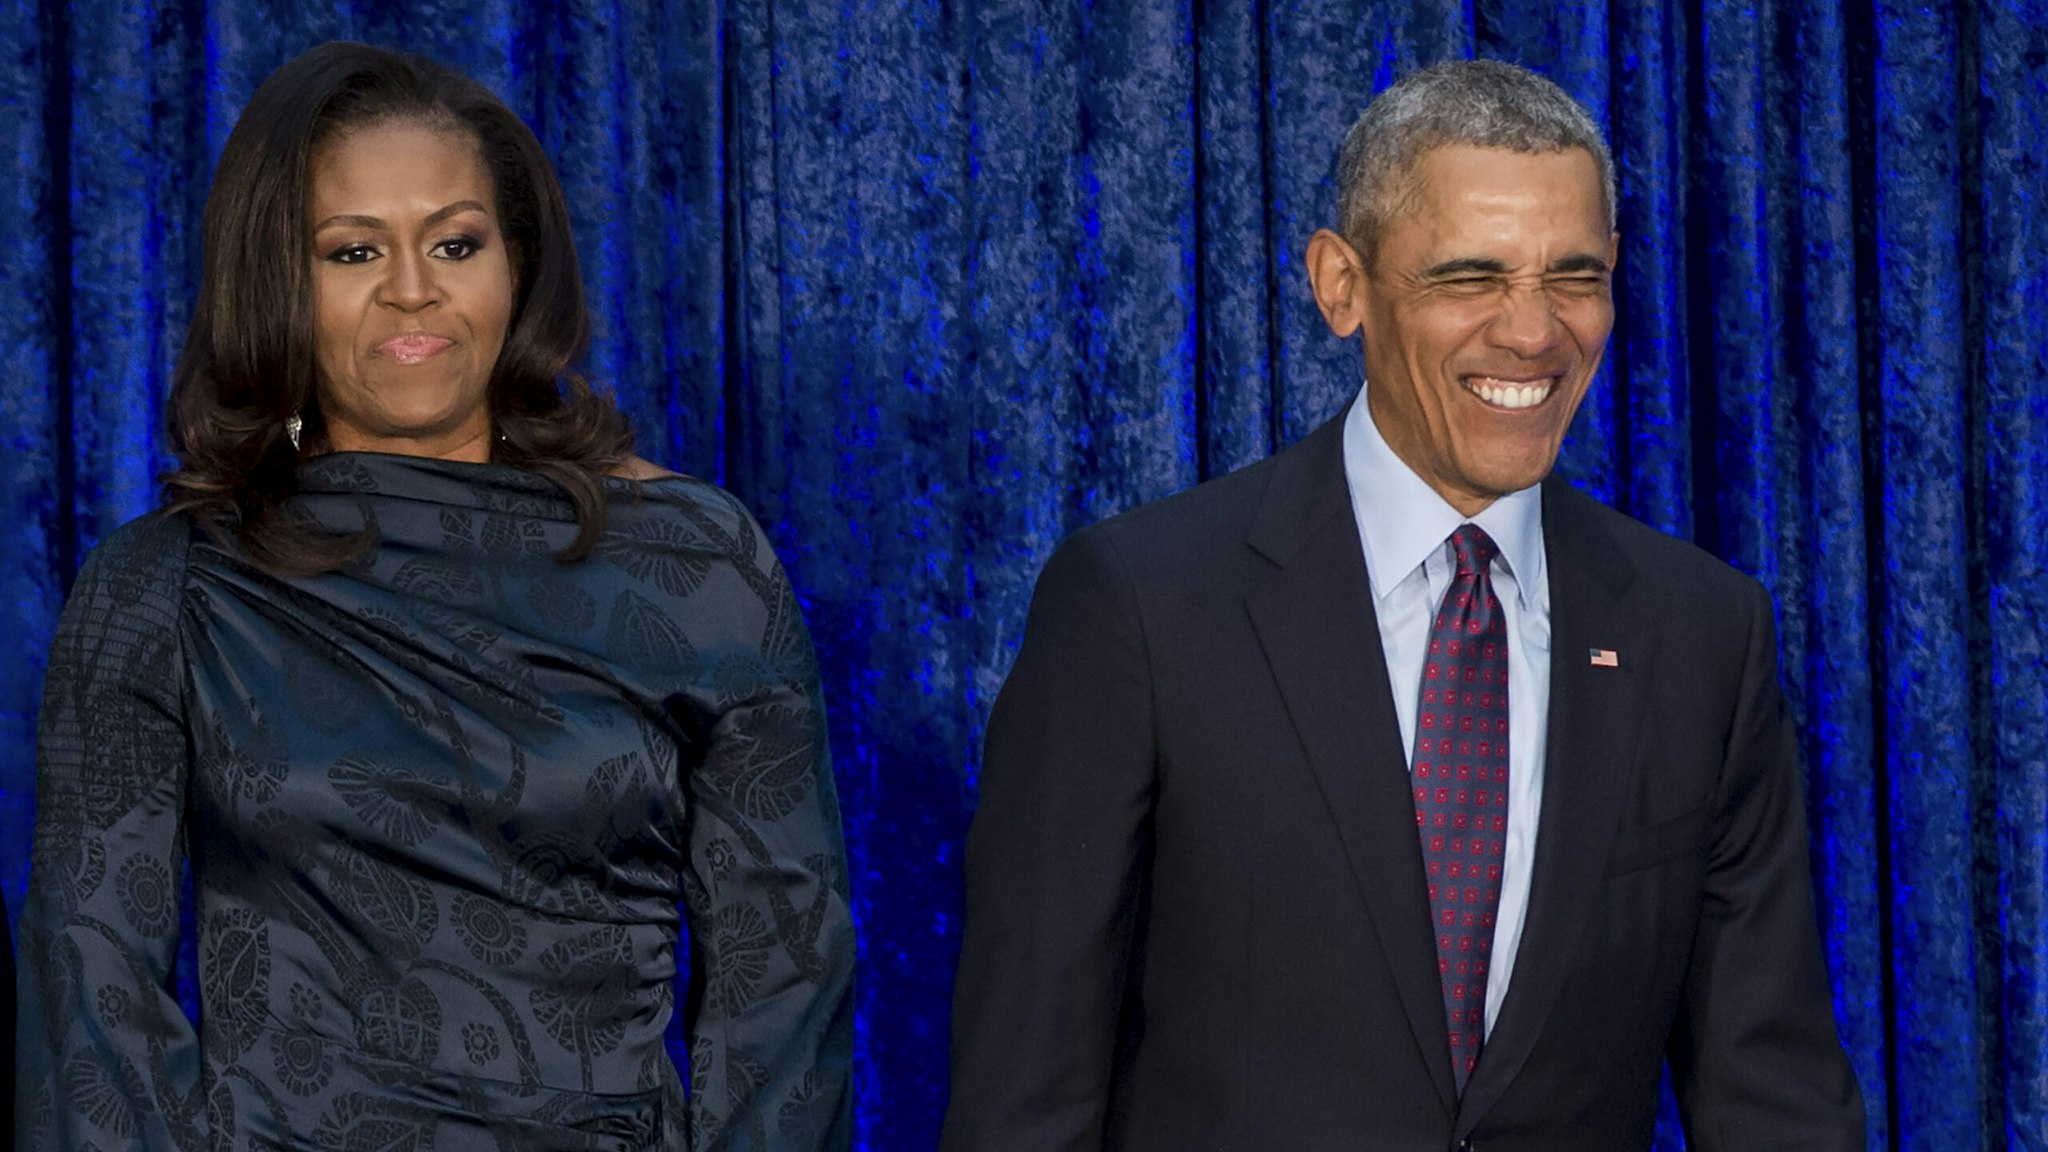 TOPSHOT - Former US President Barack Obama and former US First Lady Michelle Obama attend the unveiling of their portraits at the Smithsonian's National Portrait Gallery in Washington, DC, February 12, 2018.